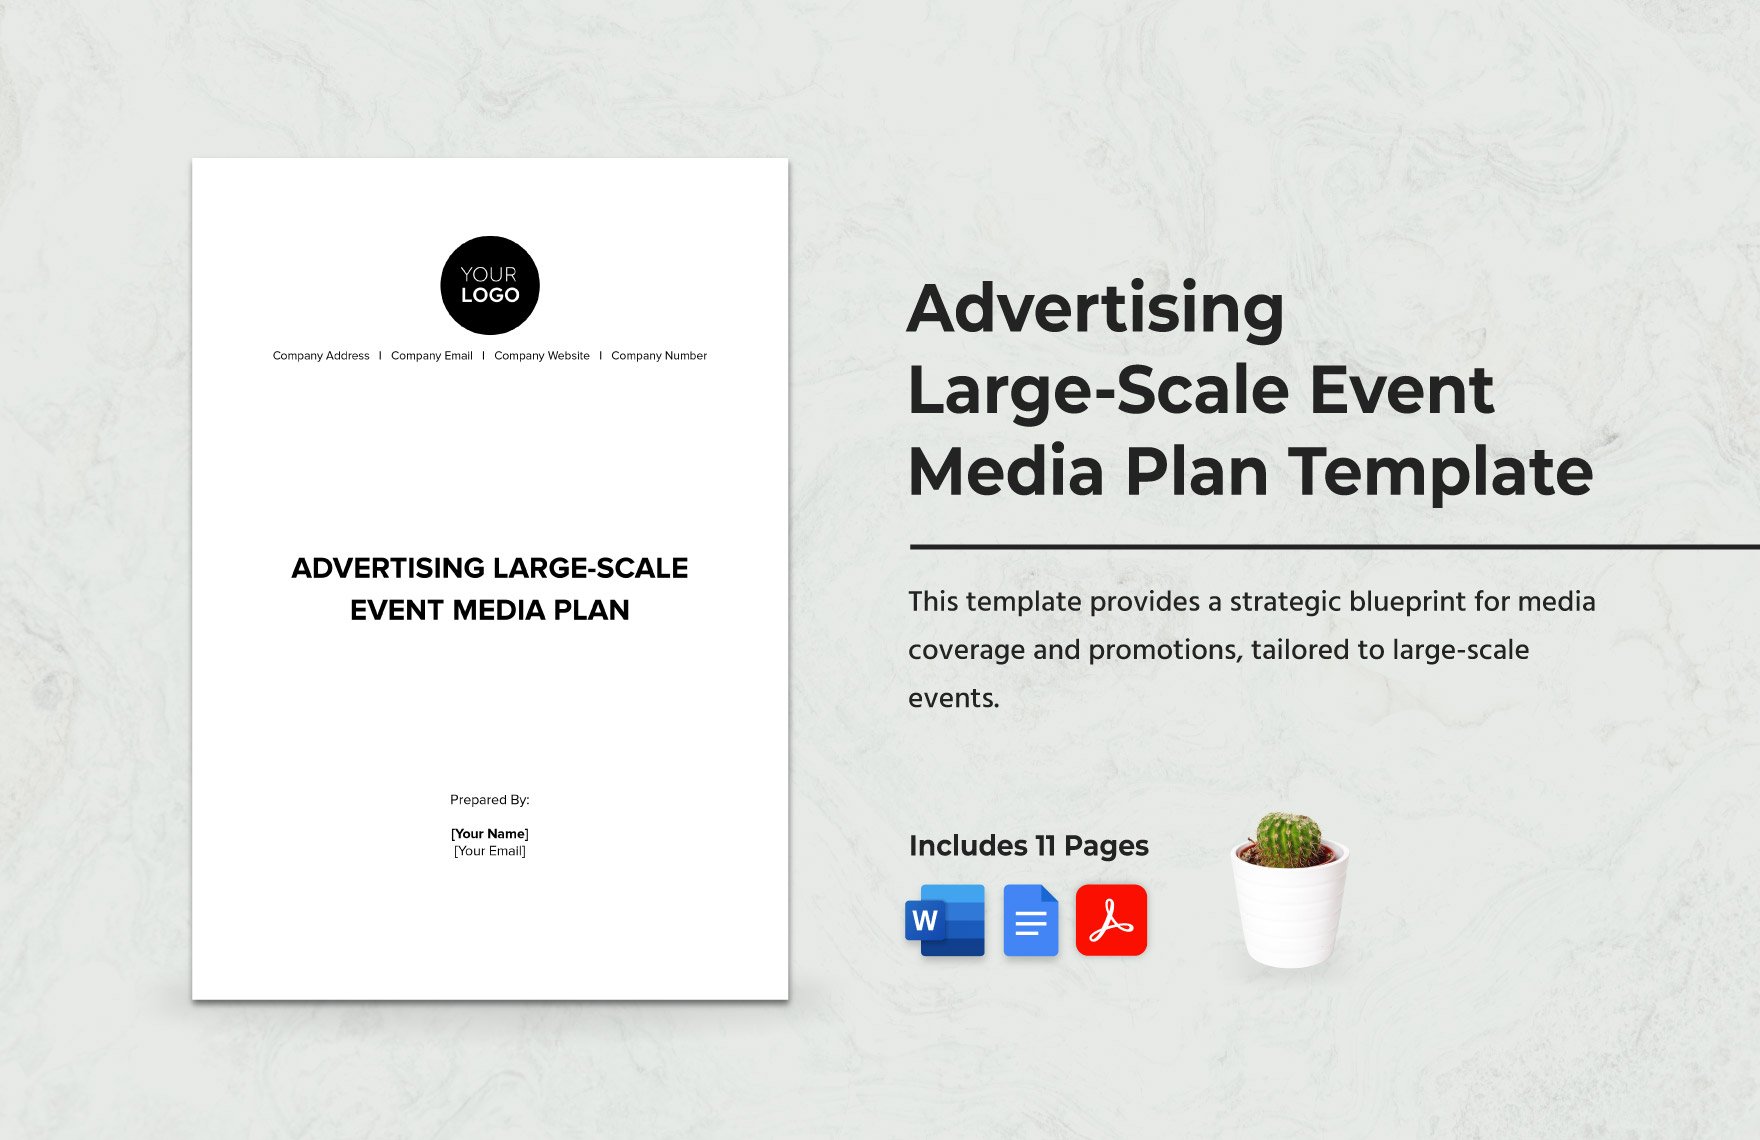 Advertising Large-Scale Event Media Plan Template in Word, Google Docs, PDF